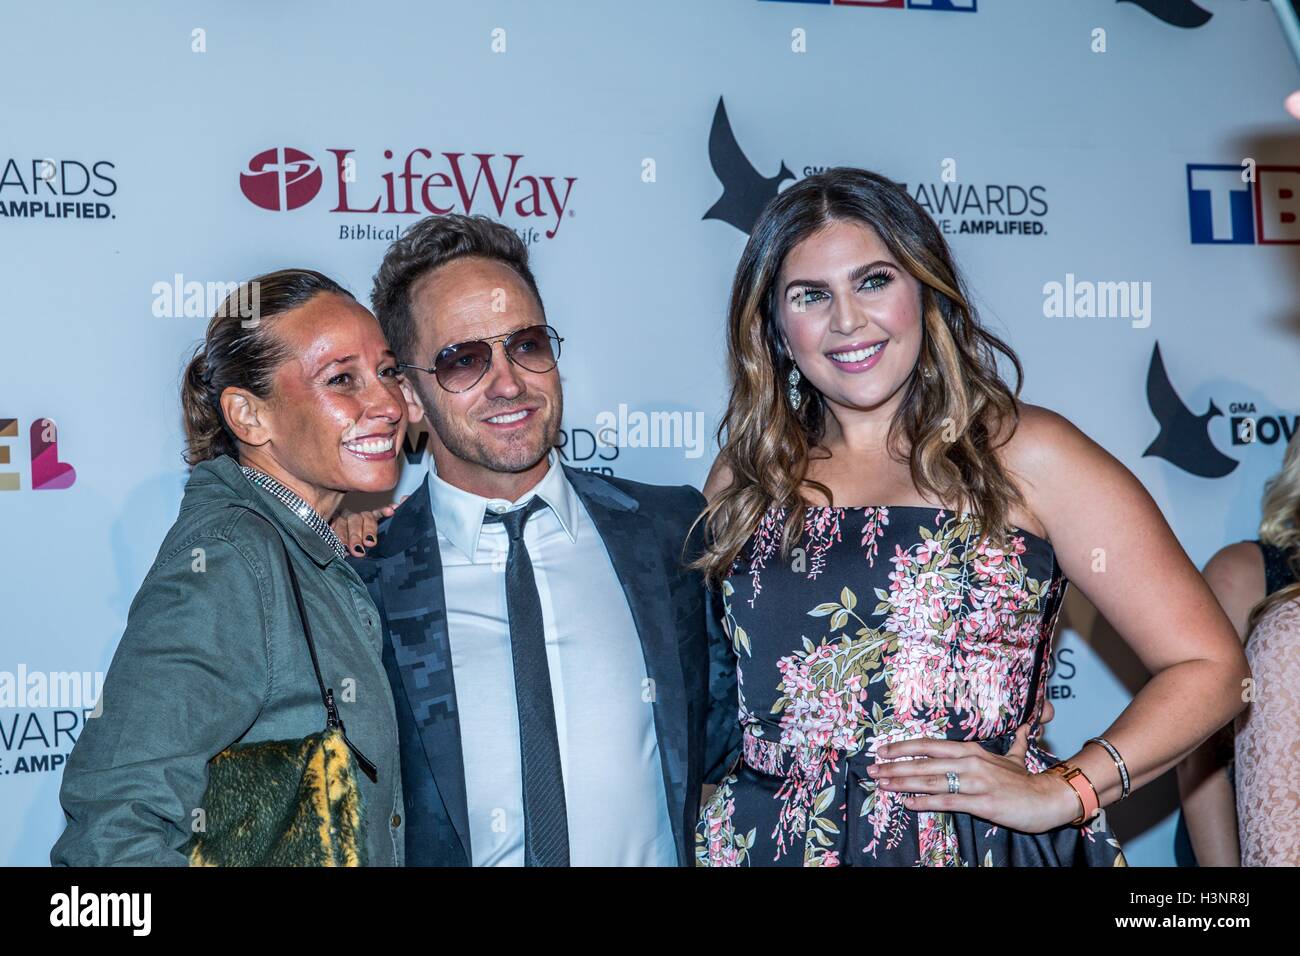 Nashville, Tennessee, USA. 11th Oct, 2016. TobyMac, Amanda Levy McKeehan and Scott at the 47th Annual GMA Dove Awards in Nashville, TN at Allen Arena on the campus of Lipscomb University.